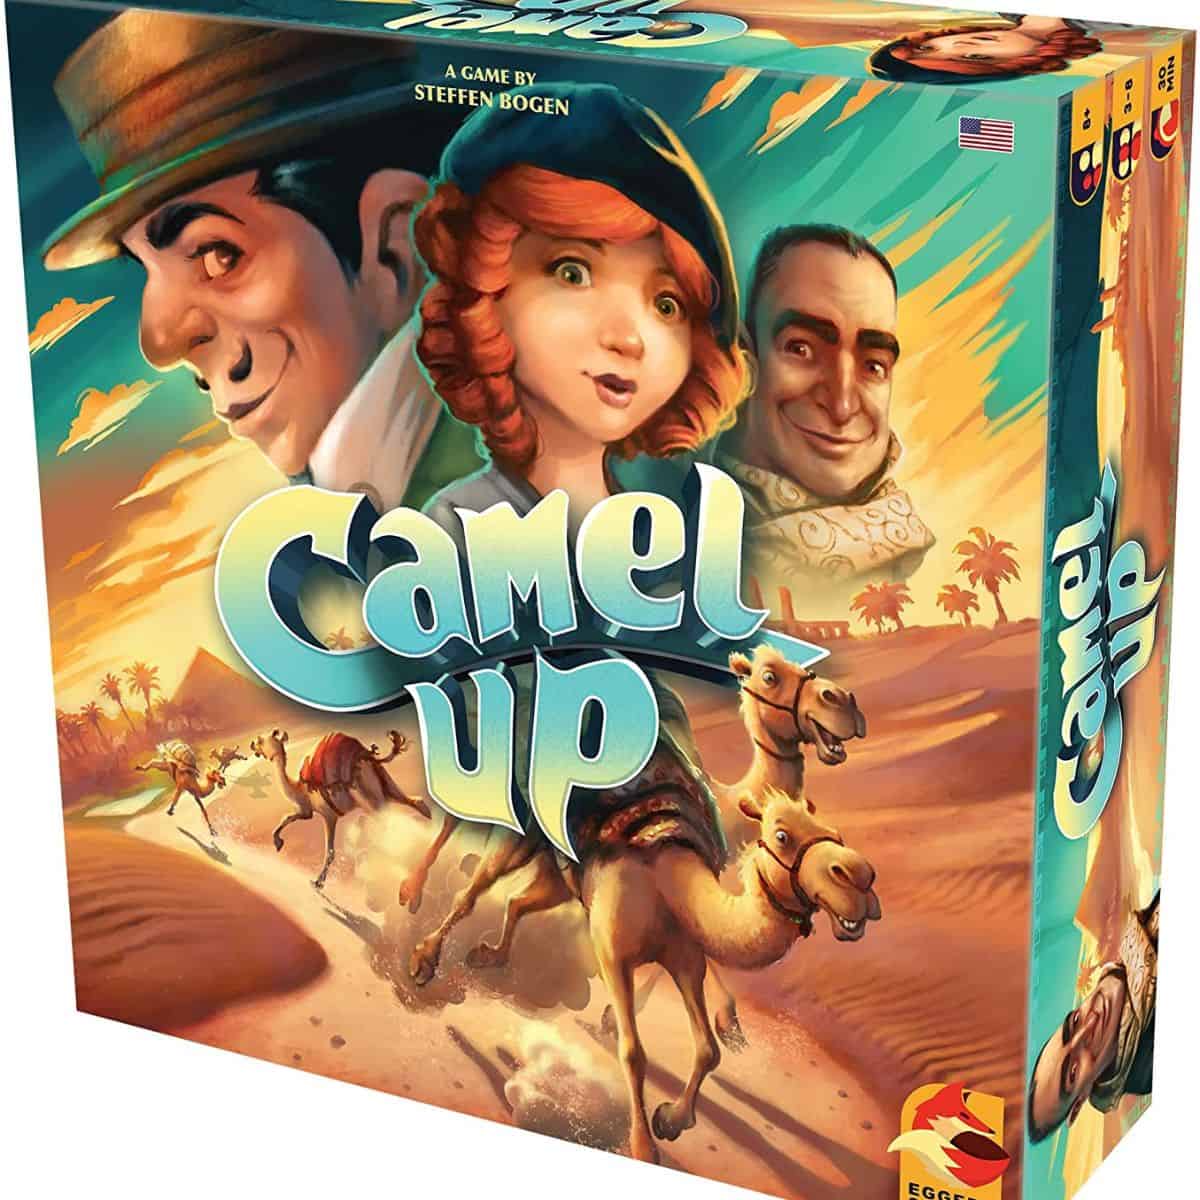 The latest cover design for the Camel Up game.